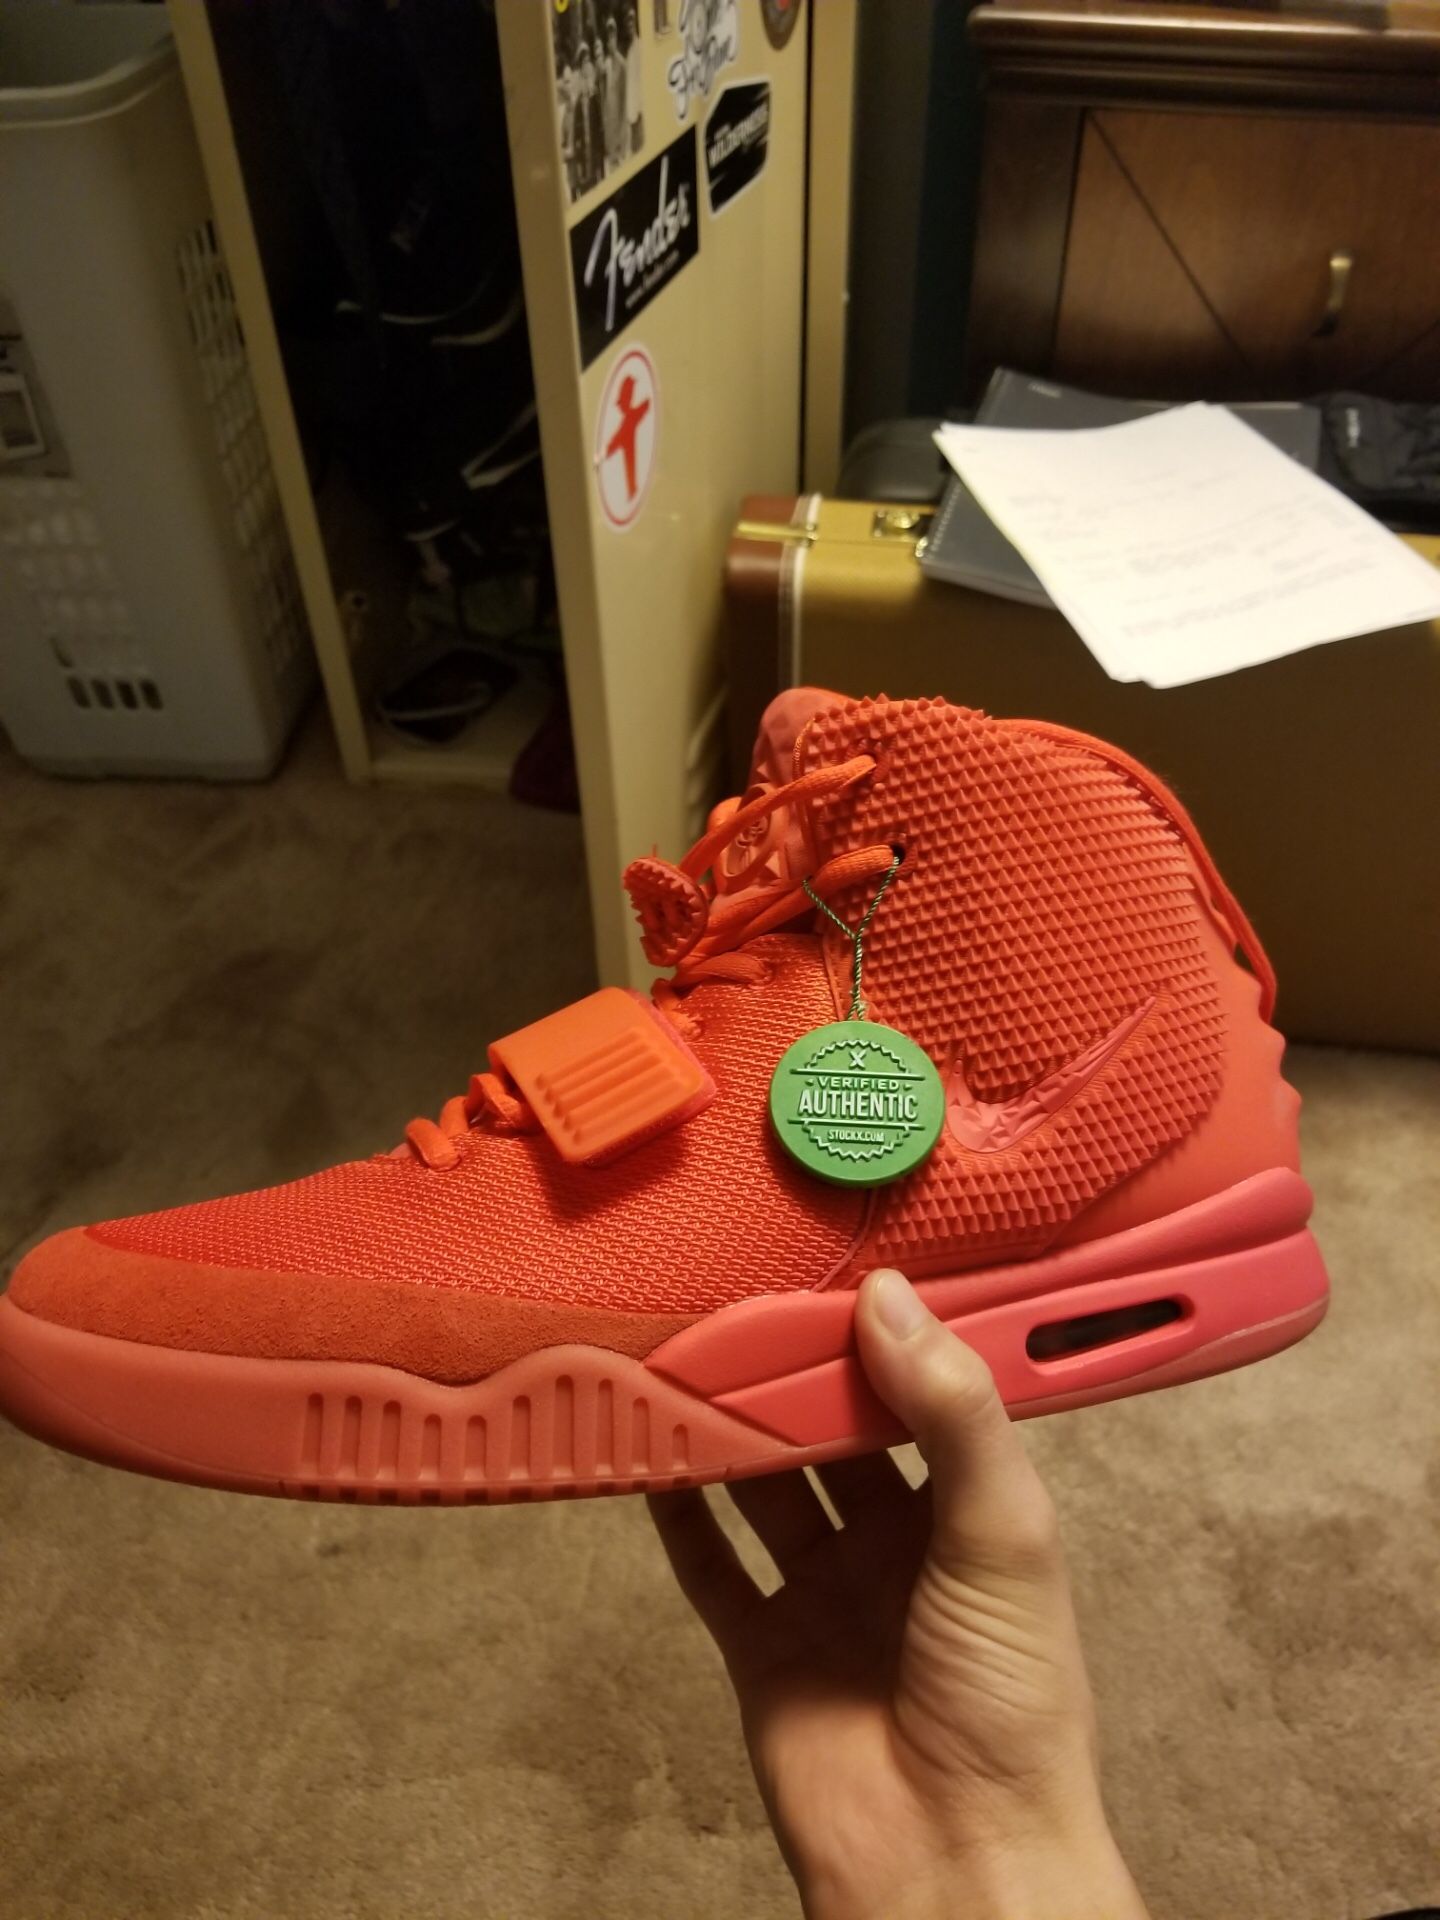 NIKE Air Yeezy 2 OCTOBERS size 12 - X VERIFIED for Sale in Peoria, AZ OfferUp